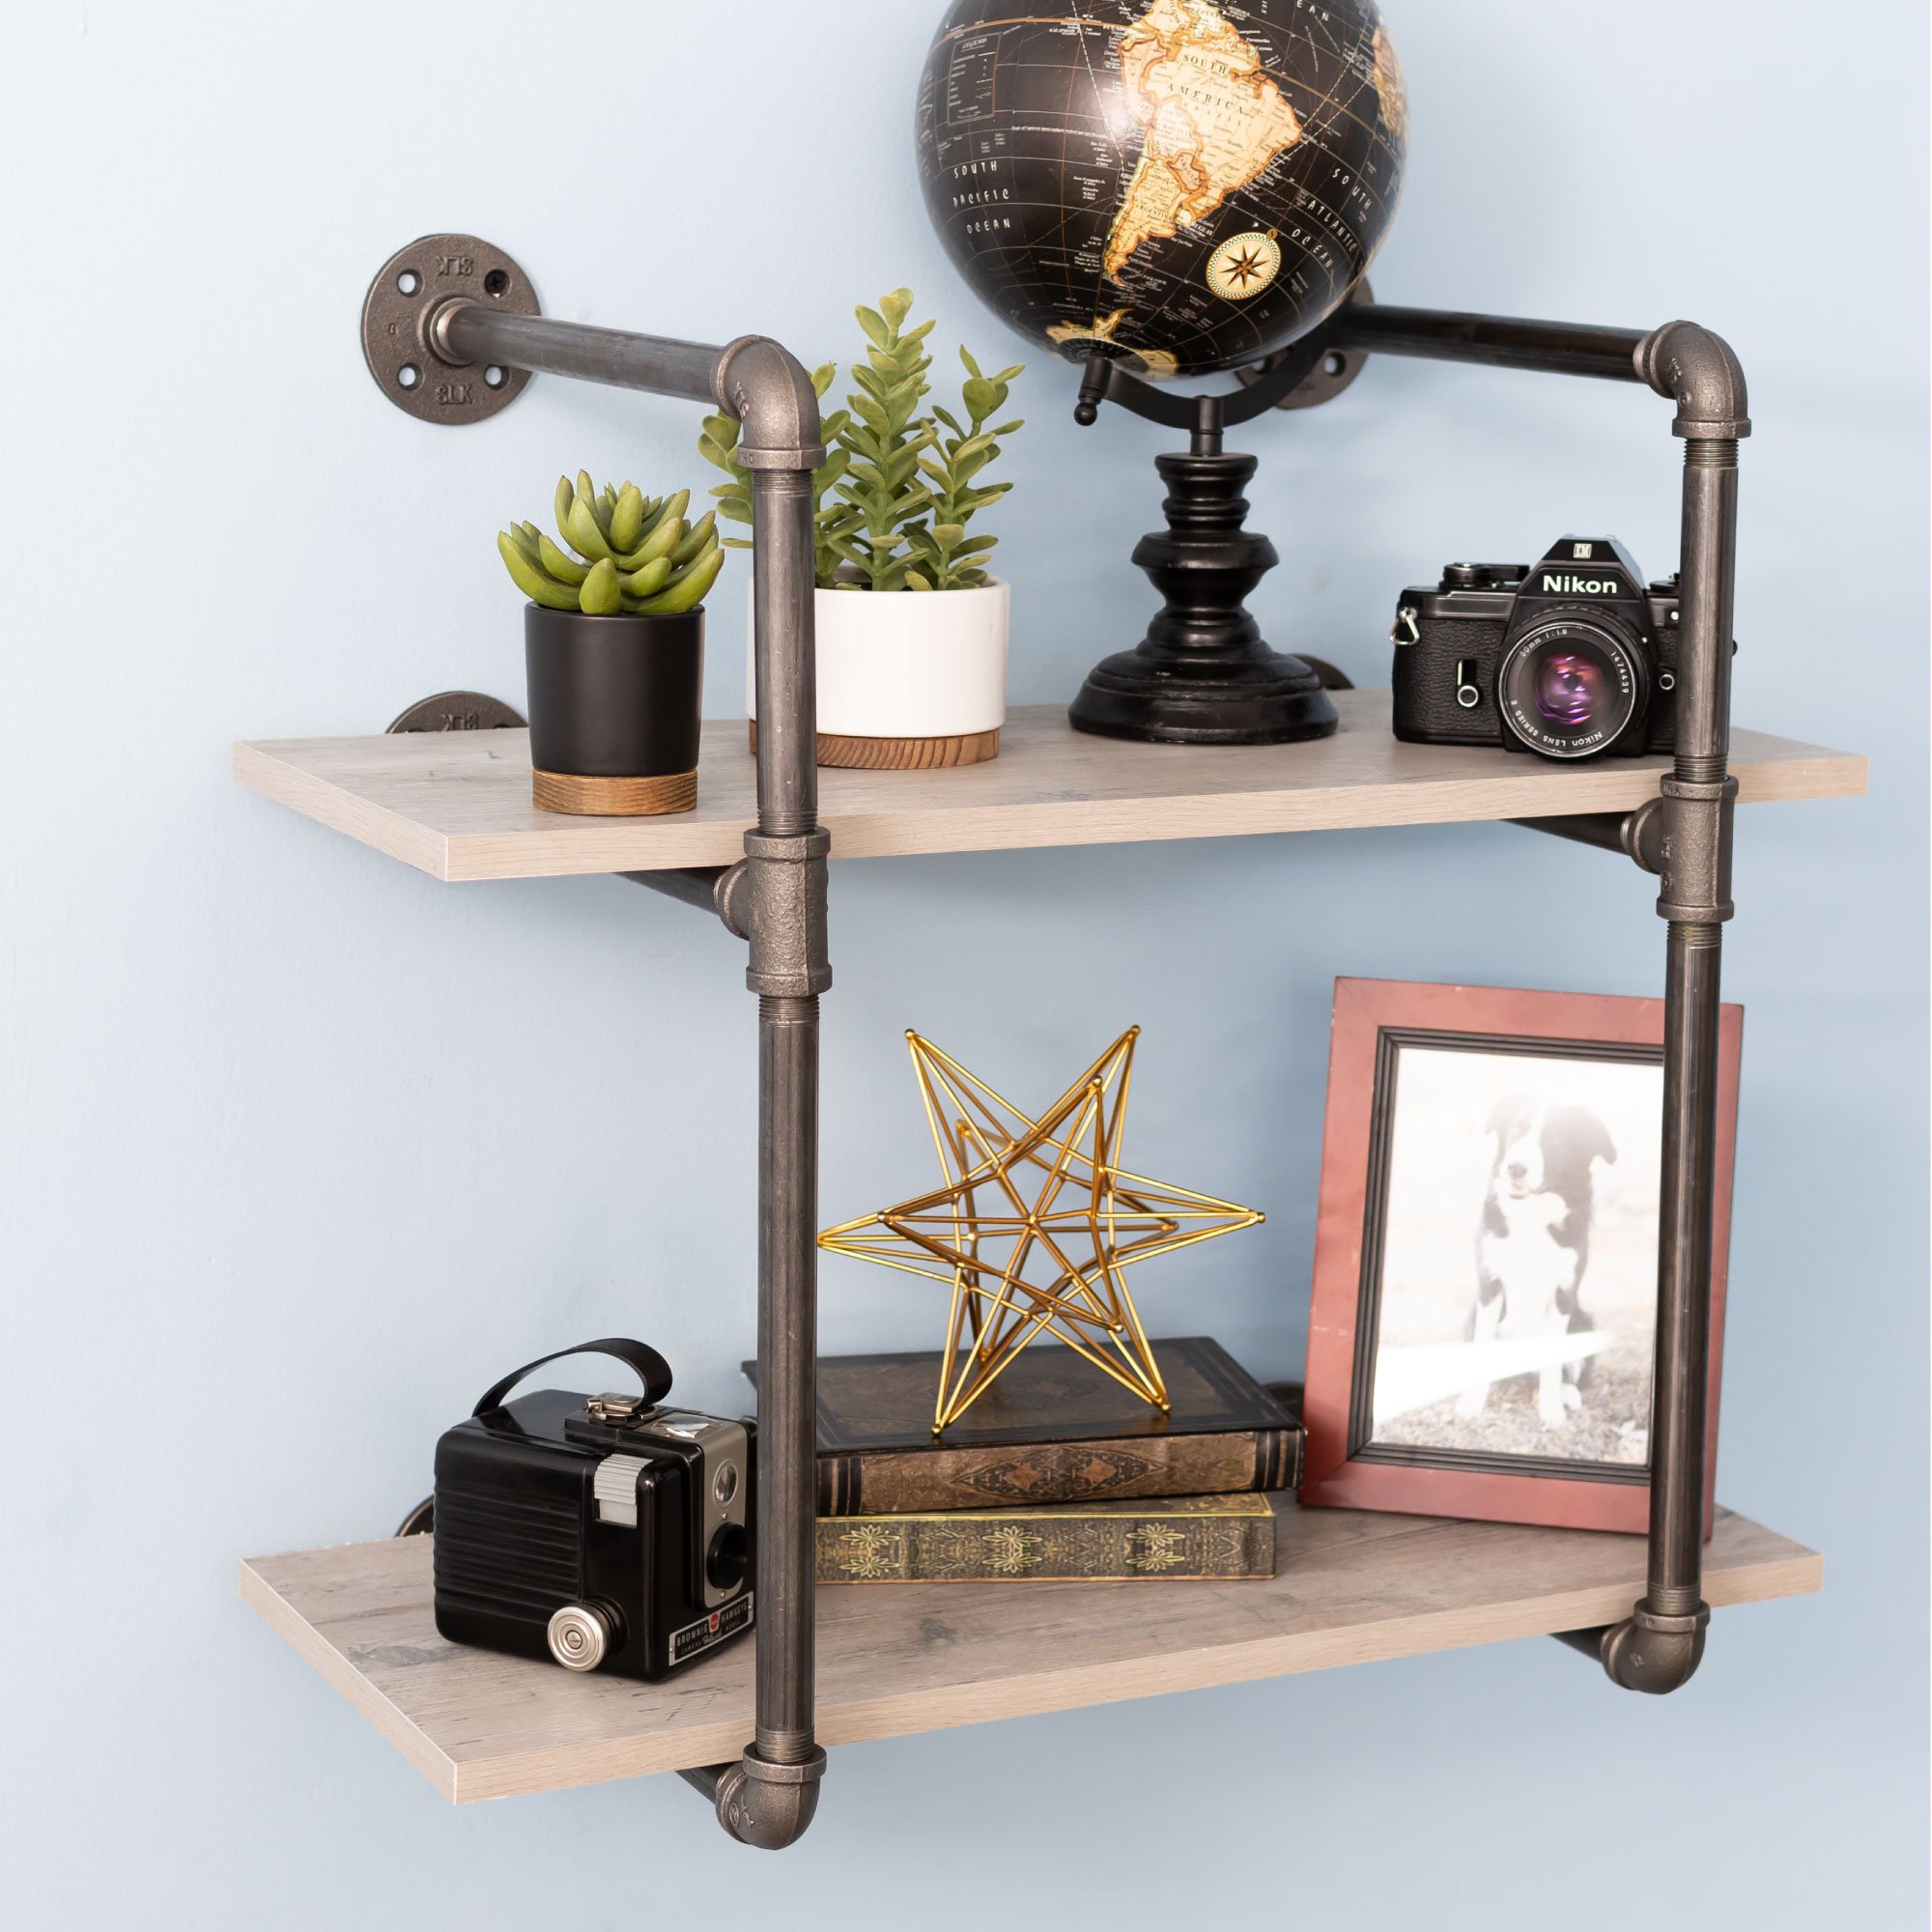 Pipe-Decor.com Rustic Industrial Floating Shelving Distressed Aged Wood and Iron Pipes 2 tier Wall Mounted Hanging Shelf - image 4 of 9